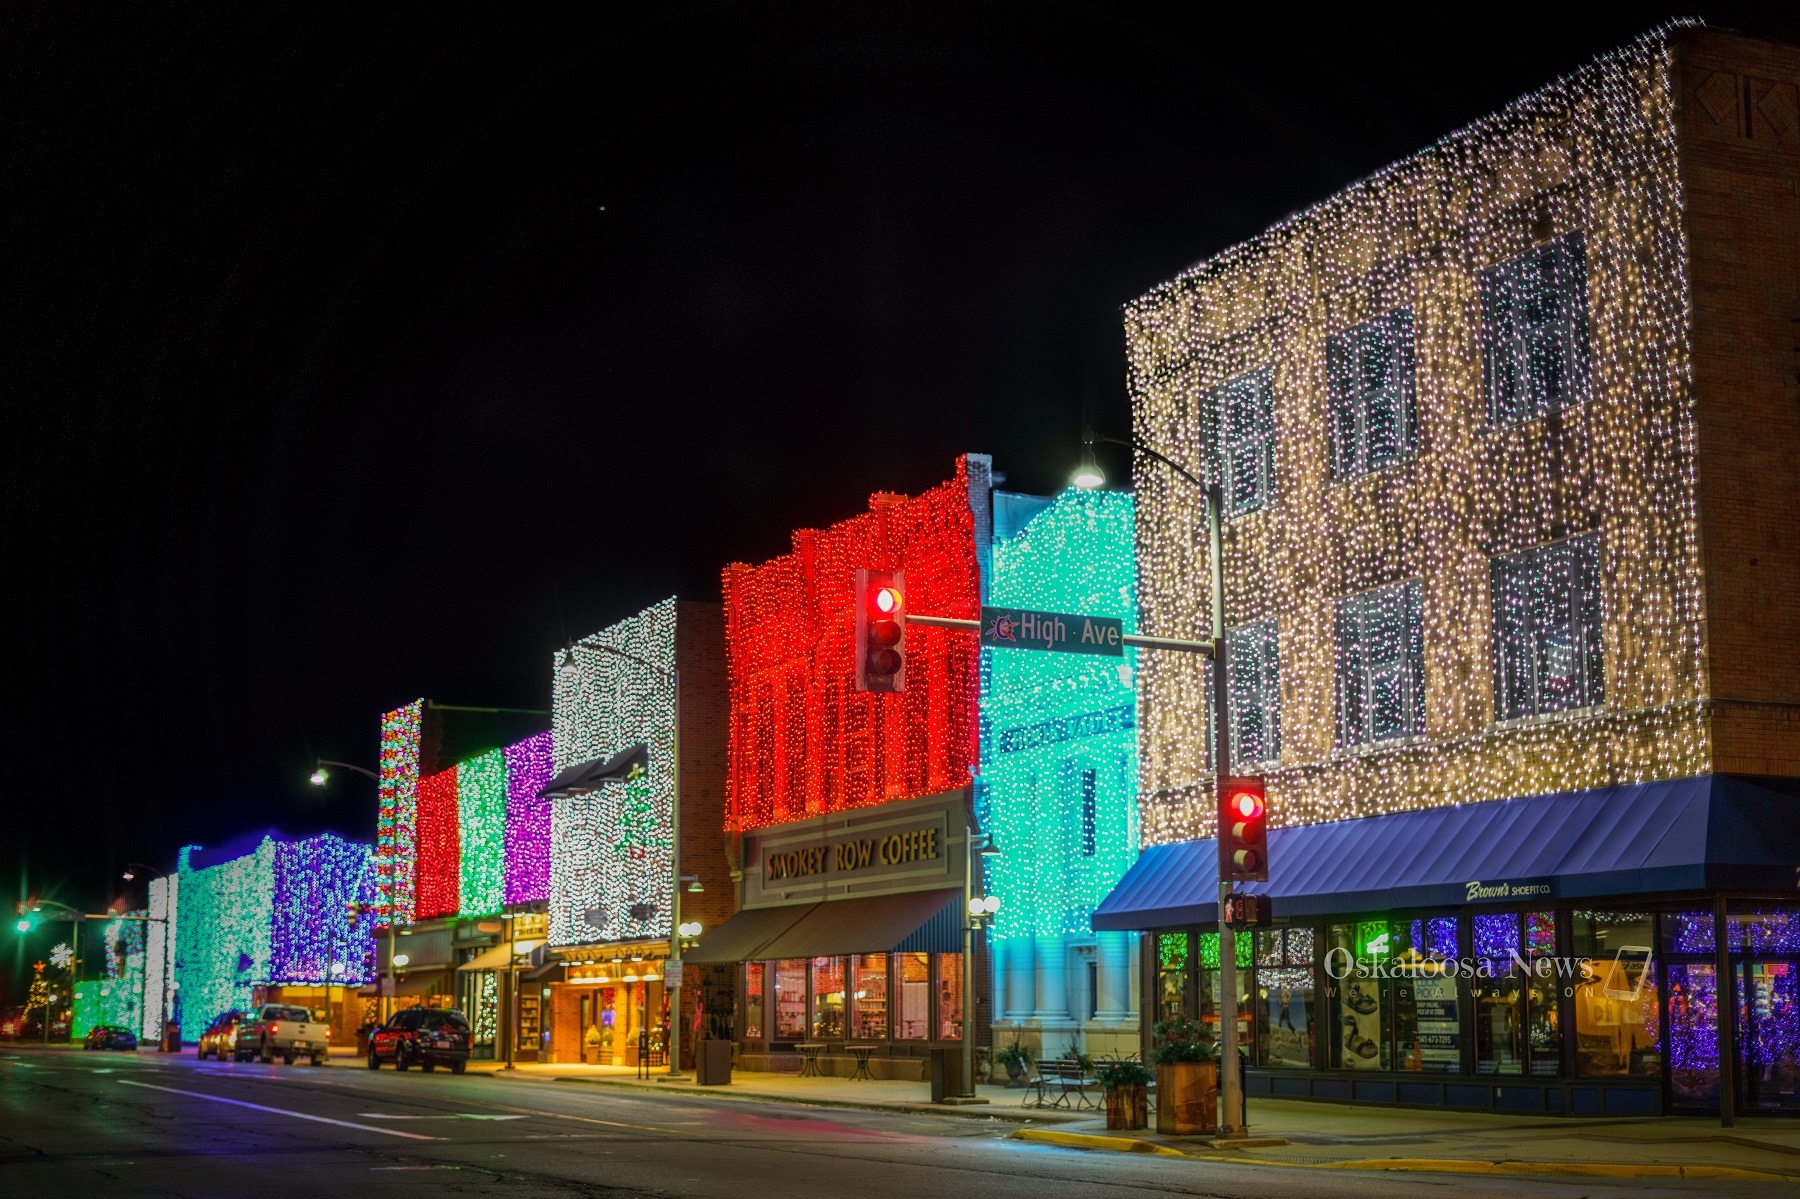 Painting with Lights, Oskaloosa 